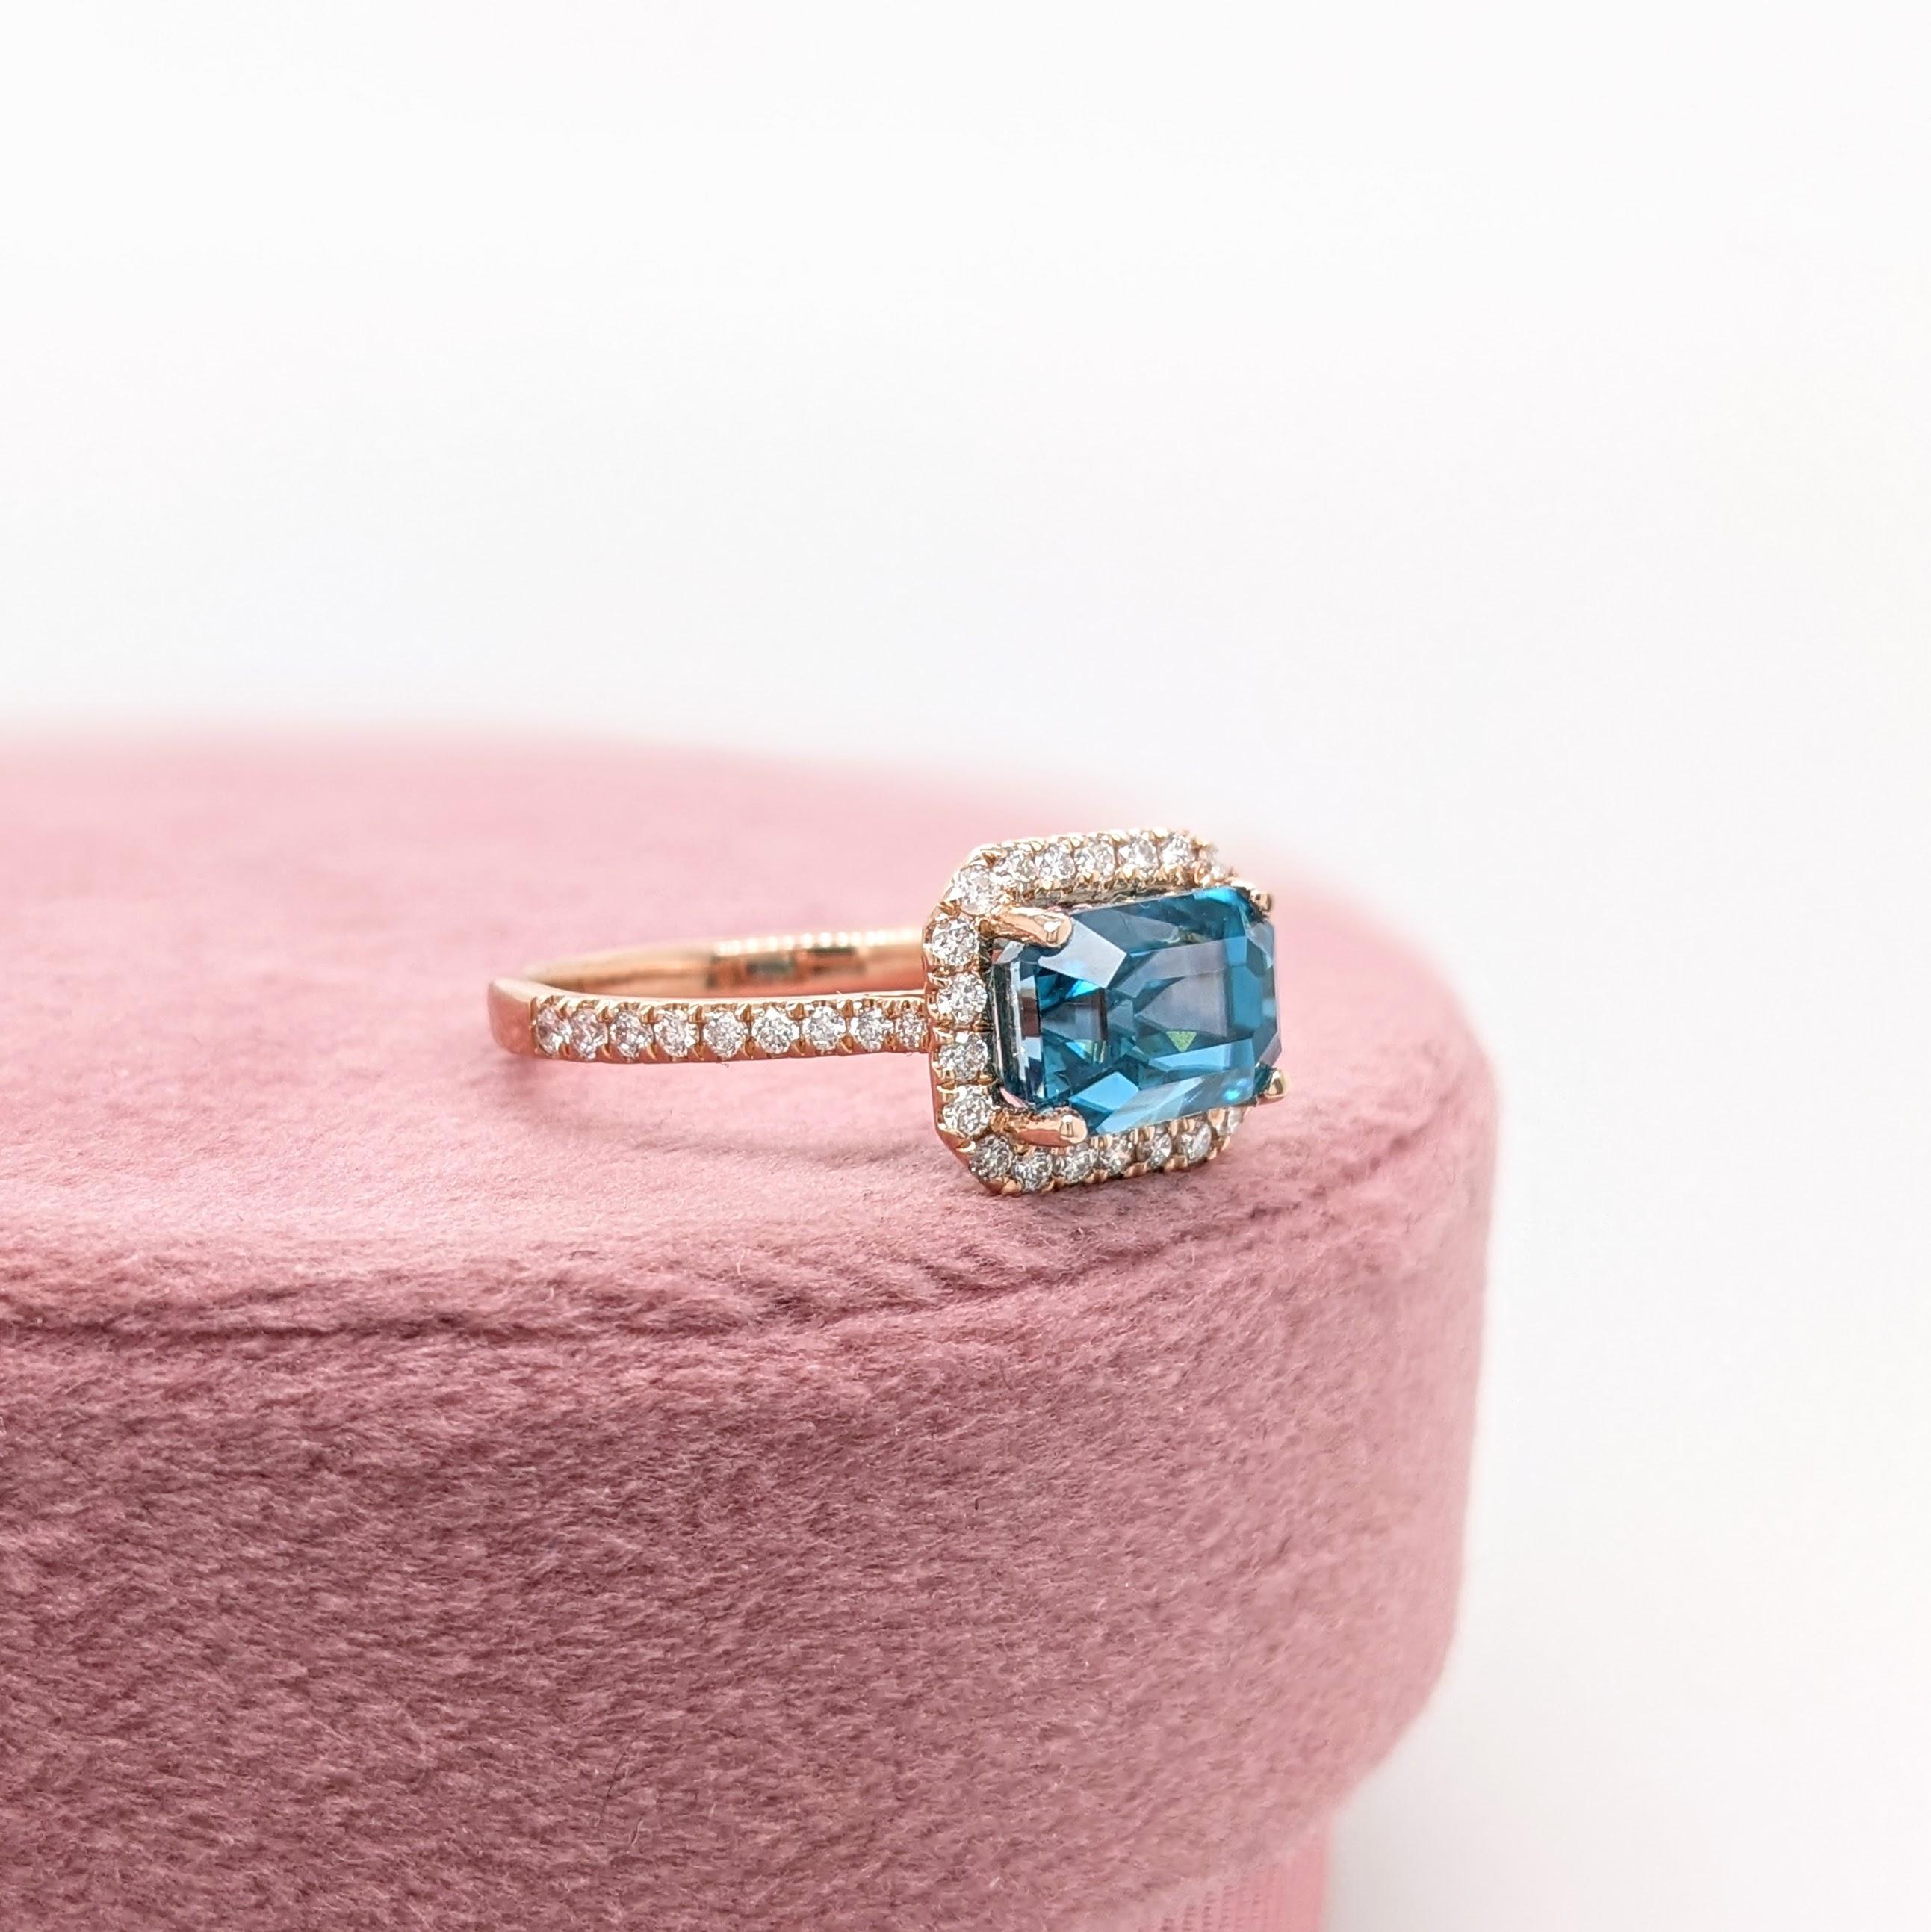 Women's 4.5ct Blue Zircon East West Ring w Natural Diamonds in Solid 14K Gold EM 8x6mm For Sale